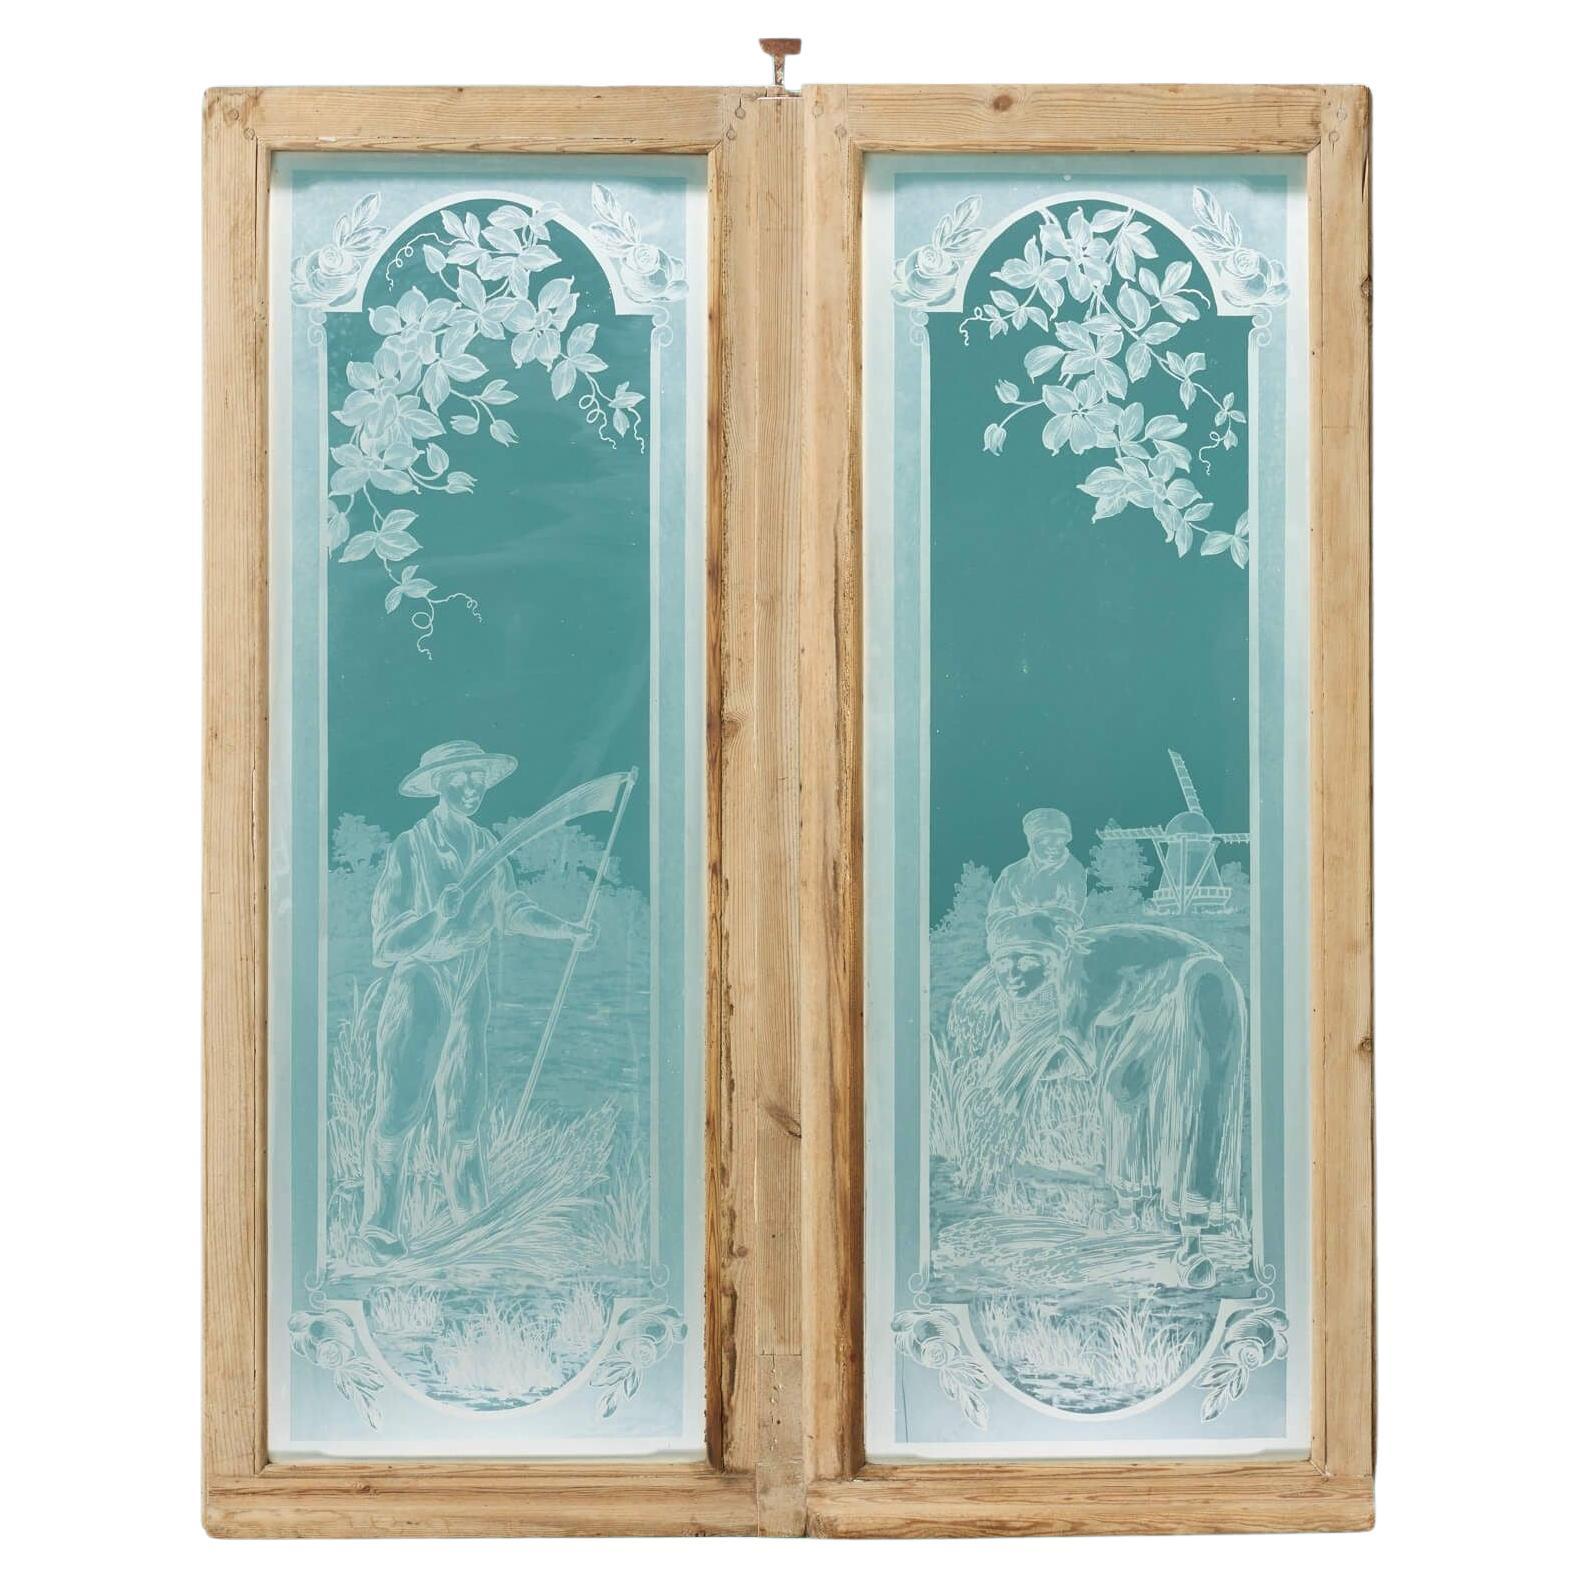 Pair of Antique Acid Etched Glass Windows For Sale